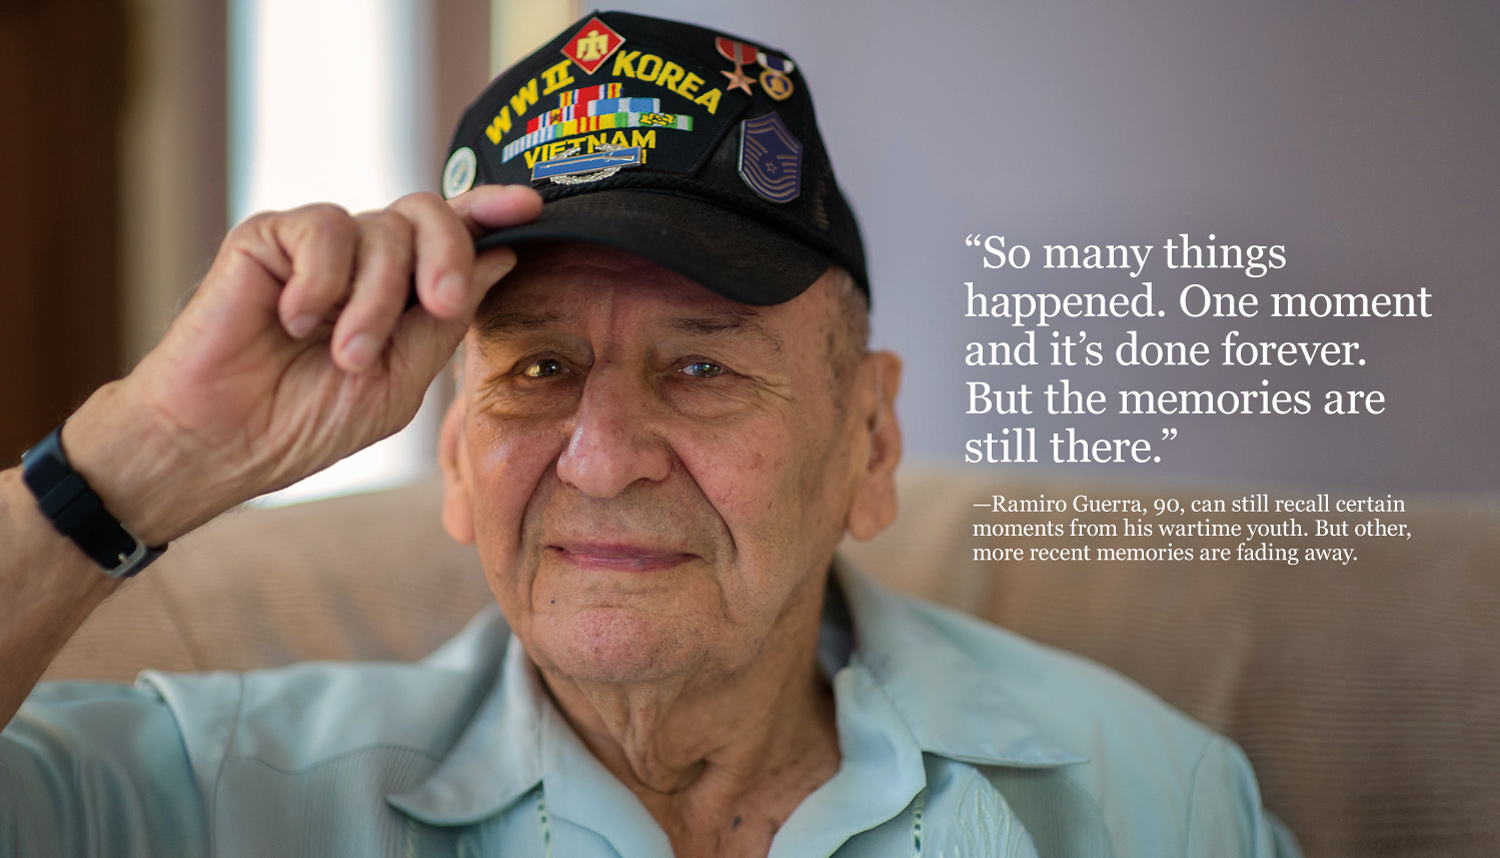 Ramiro Guerra, 90, is a triple-war veteran. He can still recall certain moments from his wartime youth, but more recent memories are fading away.